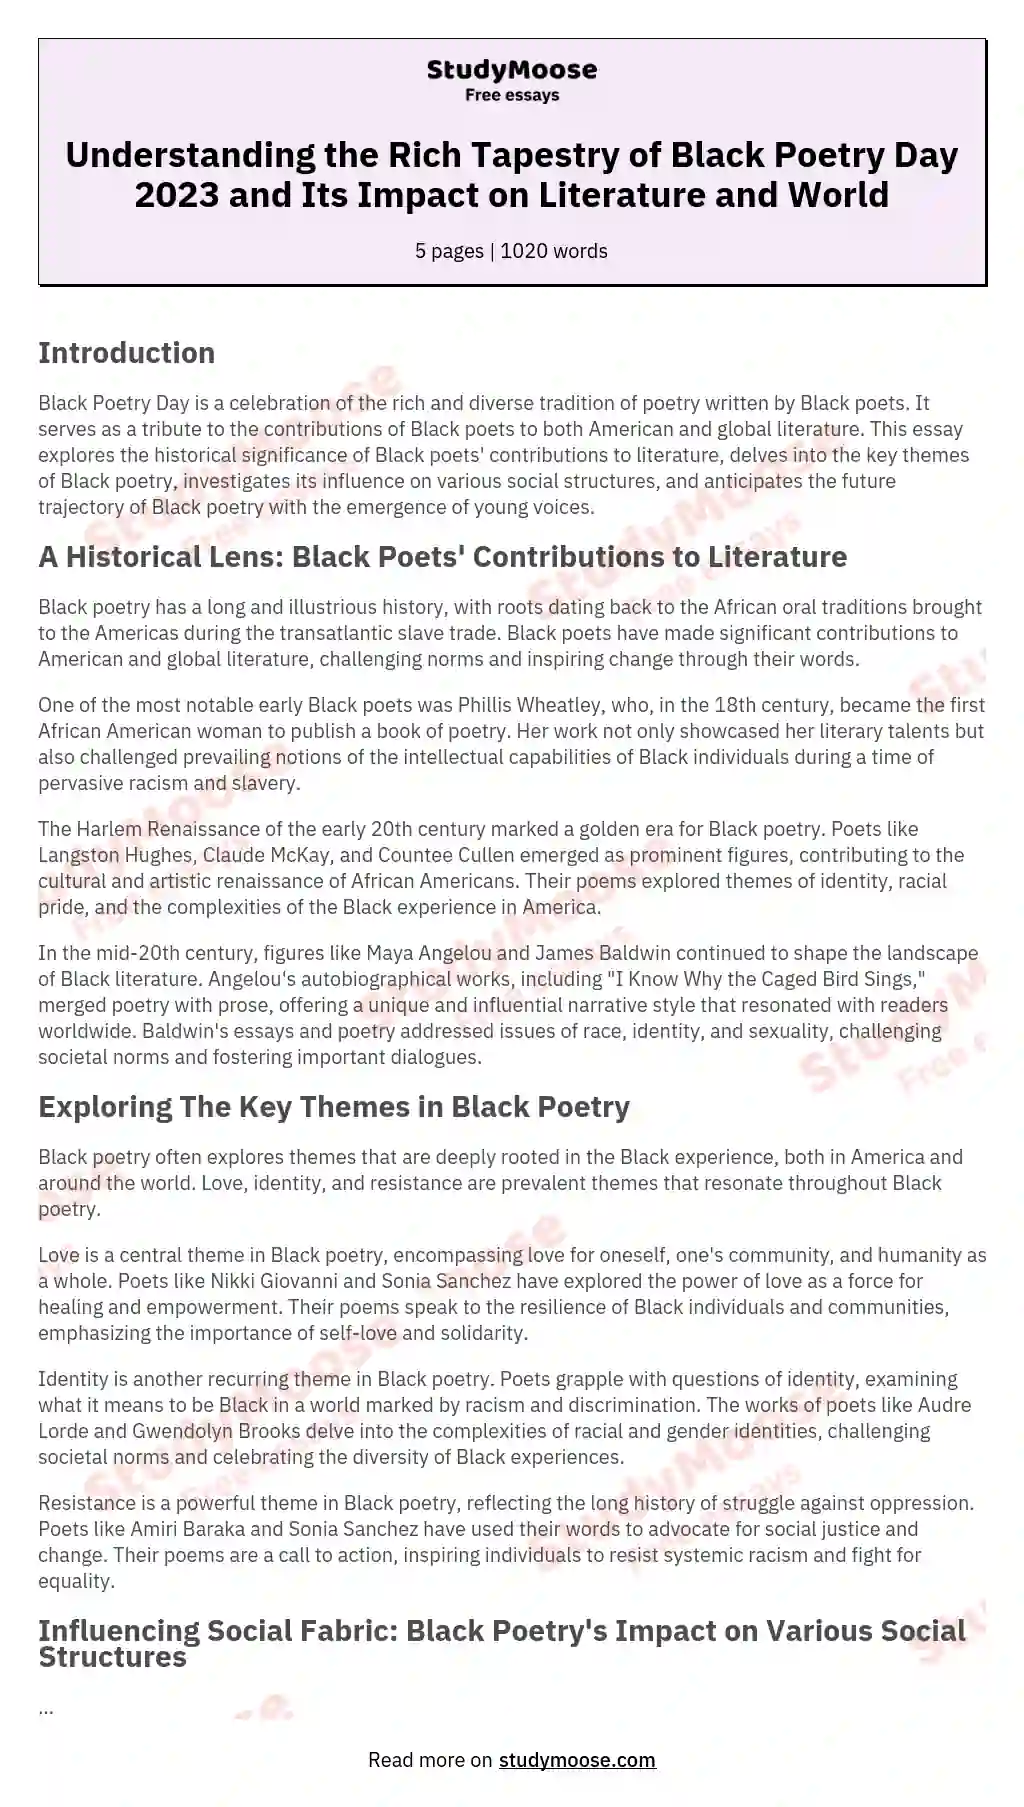 Understanding the Rich Tapestry of Black Poetry Day 2023 and Its Impact on Literature and World essay